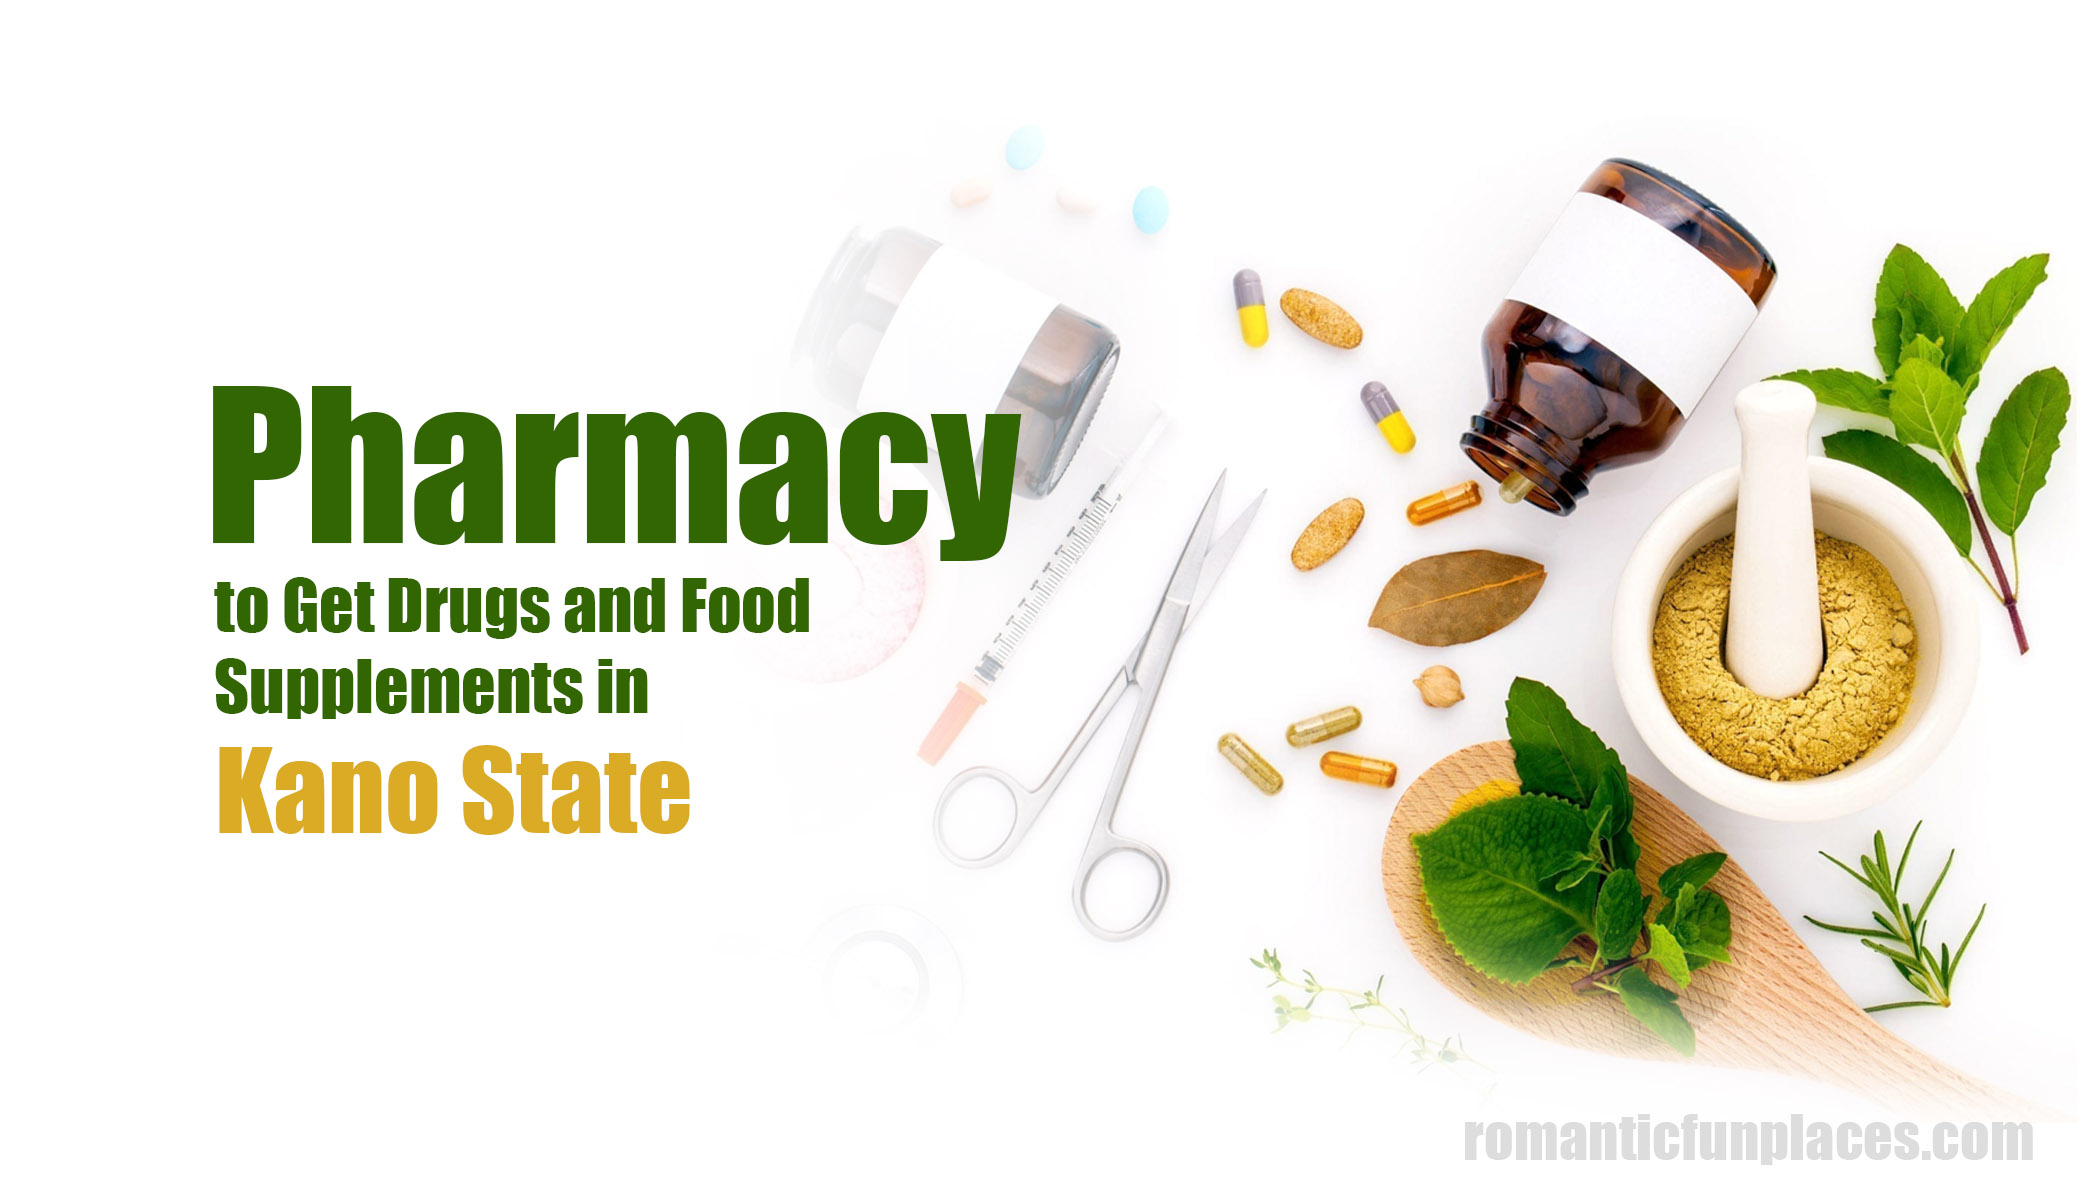 Pharmacy to Get Drugs and Food Supplements in Kano State